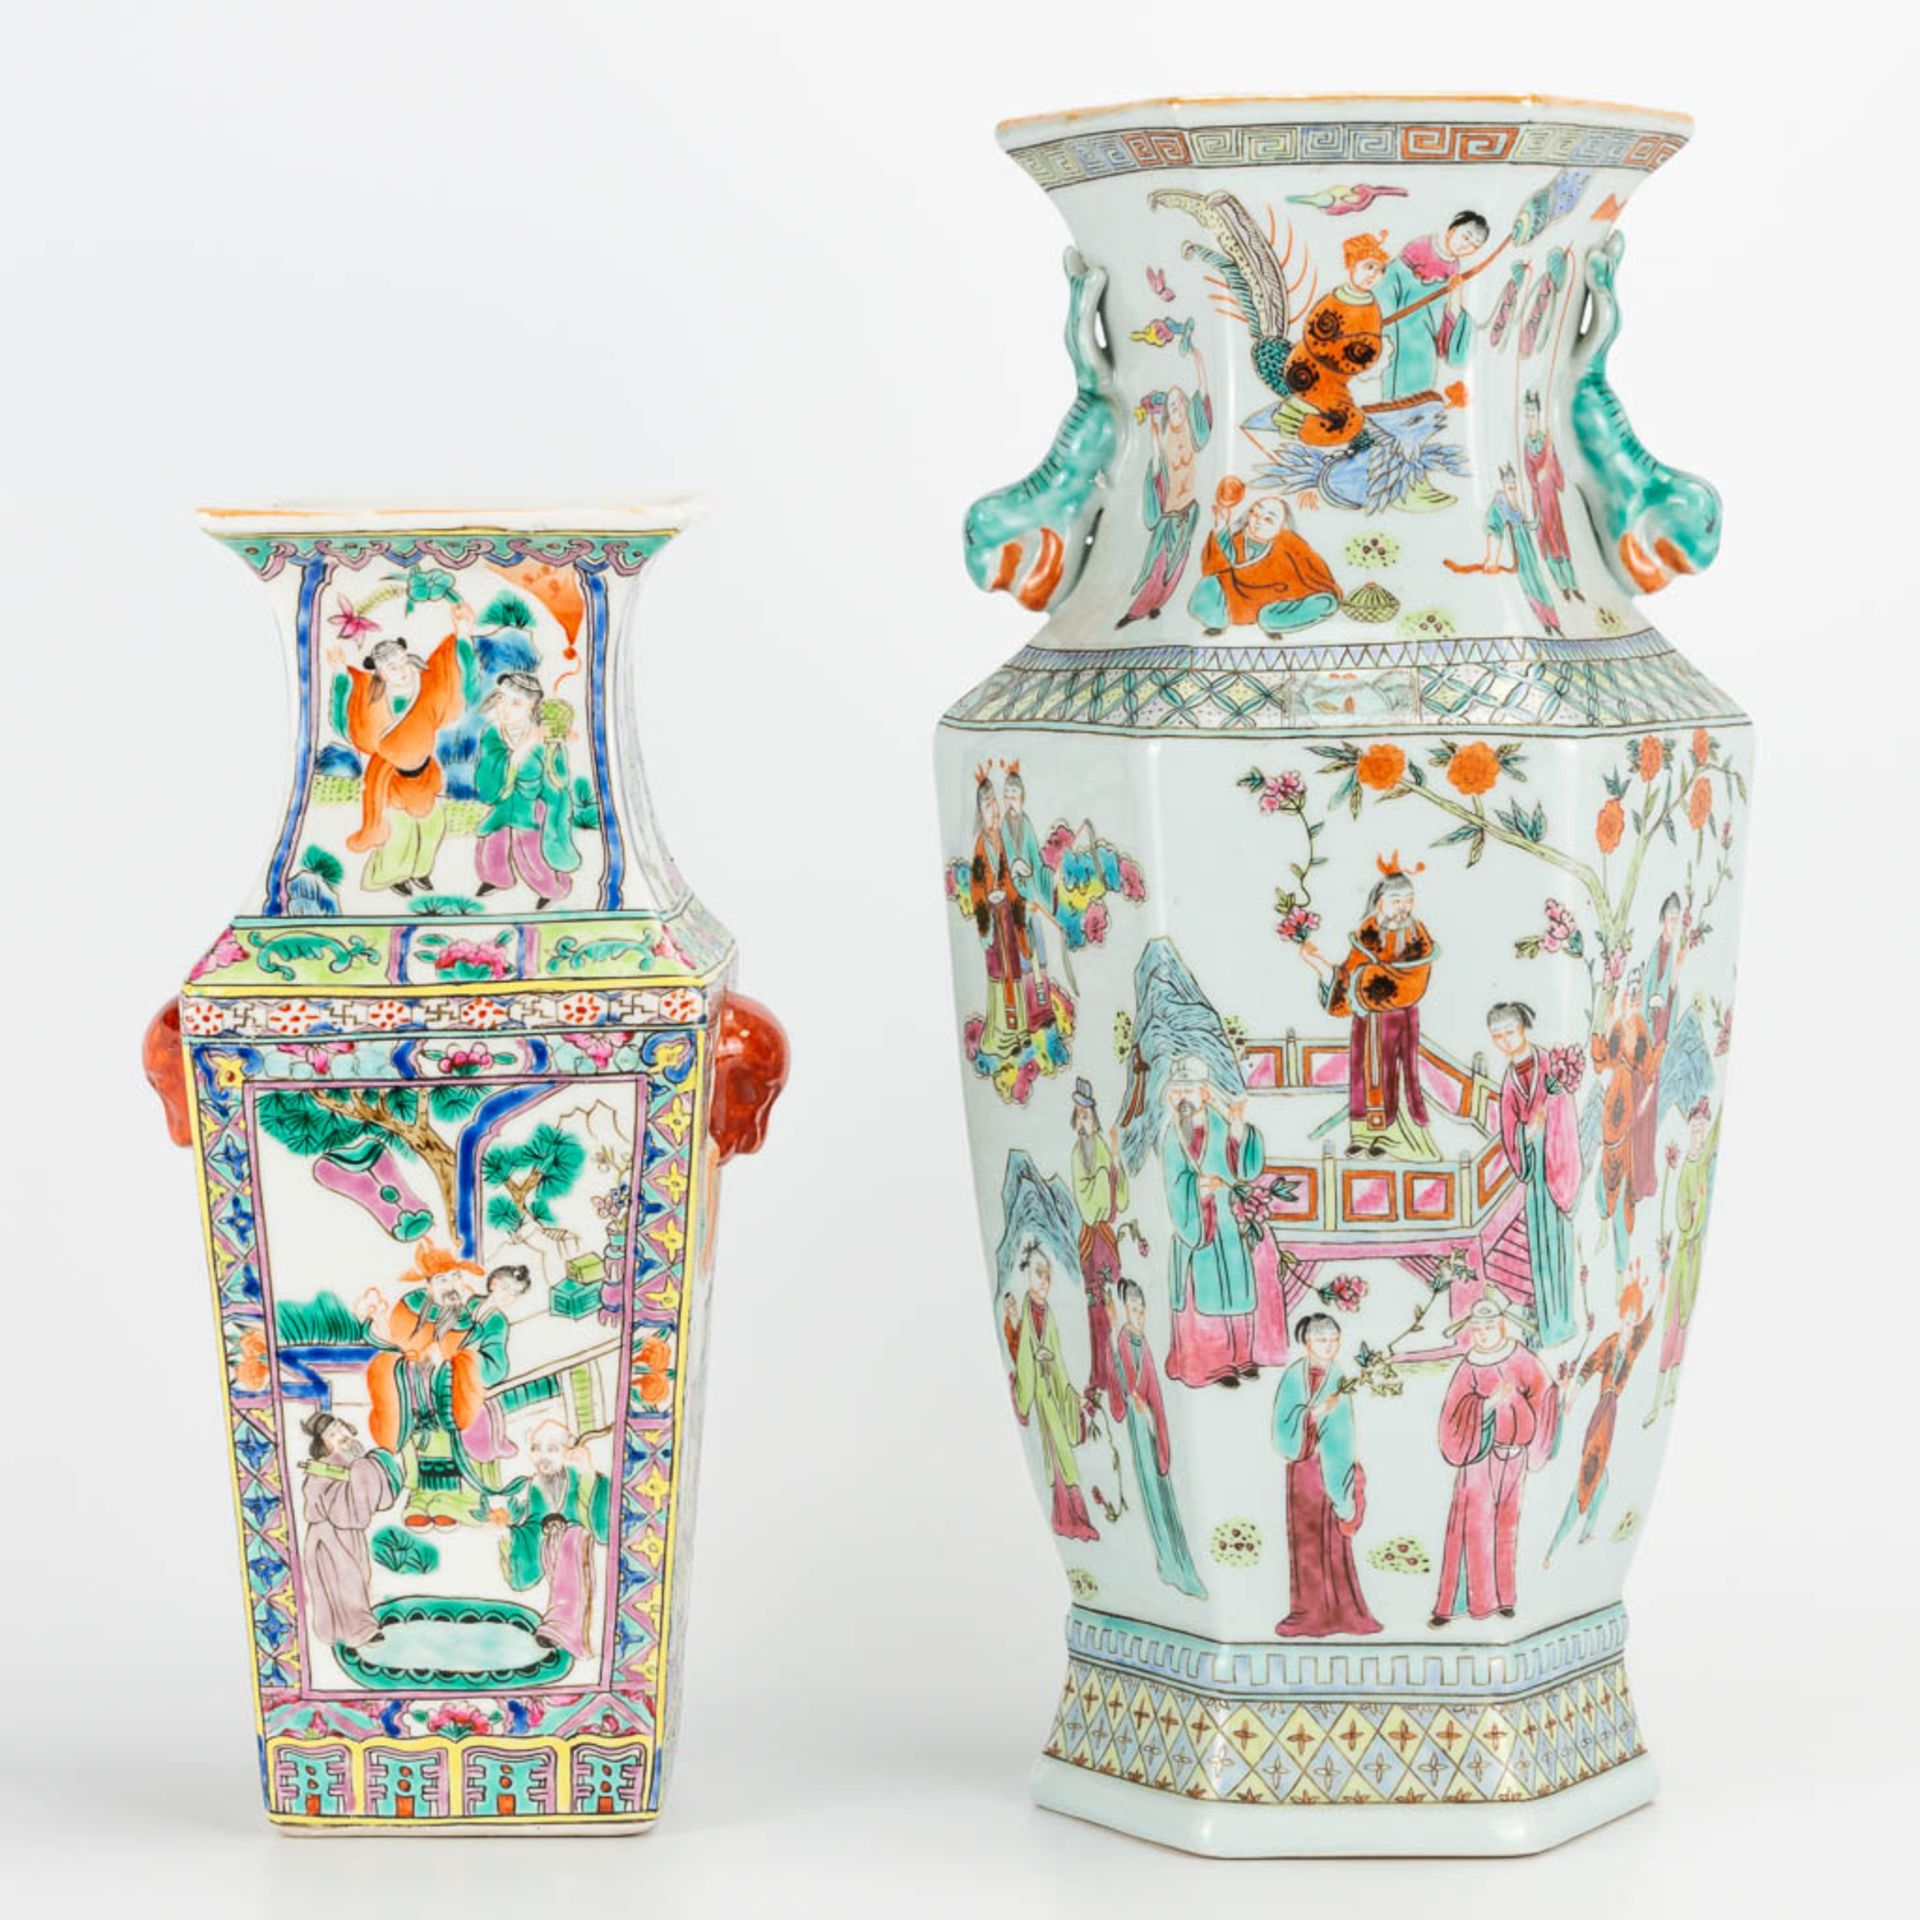 A collection of 2 Chinese vases with decor of emperors, playing children and ladies in court. 20th c